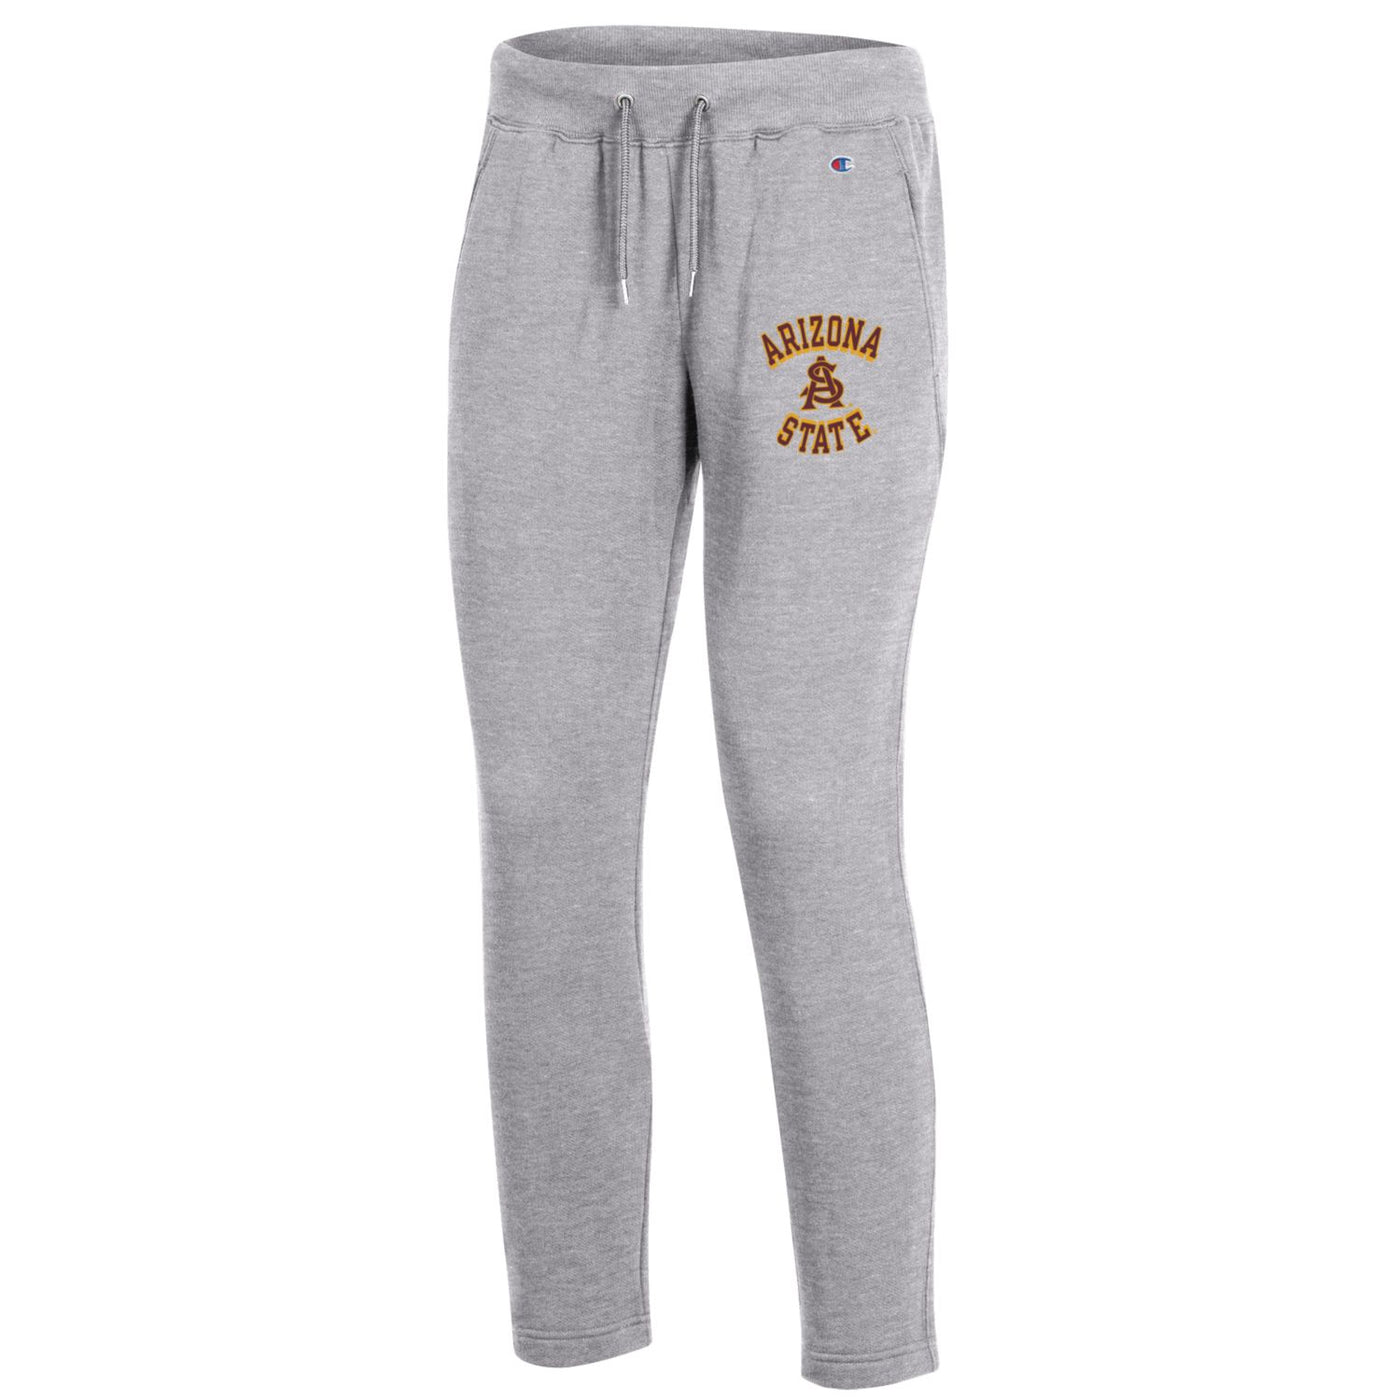 ASU gray sweat pants with Arizona State printed around A&S logo on upper front left leg